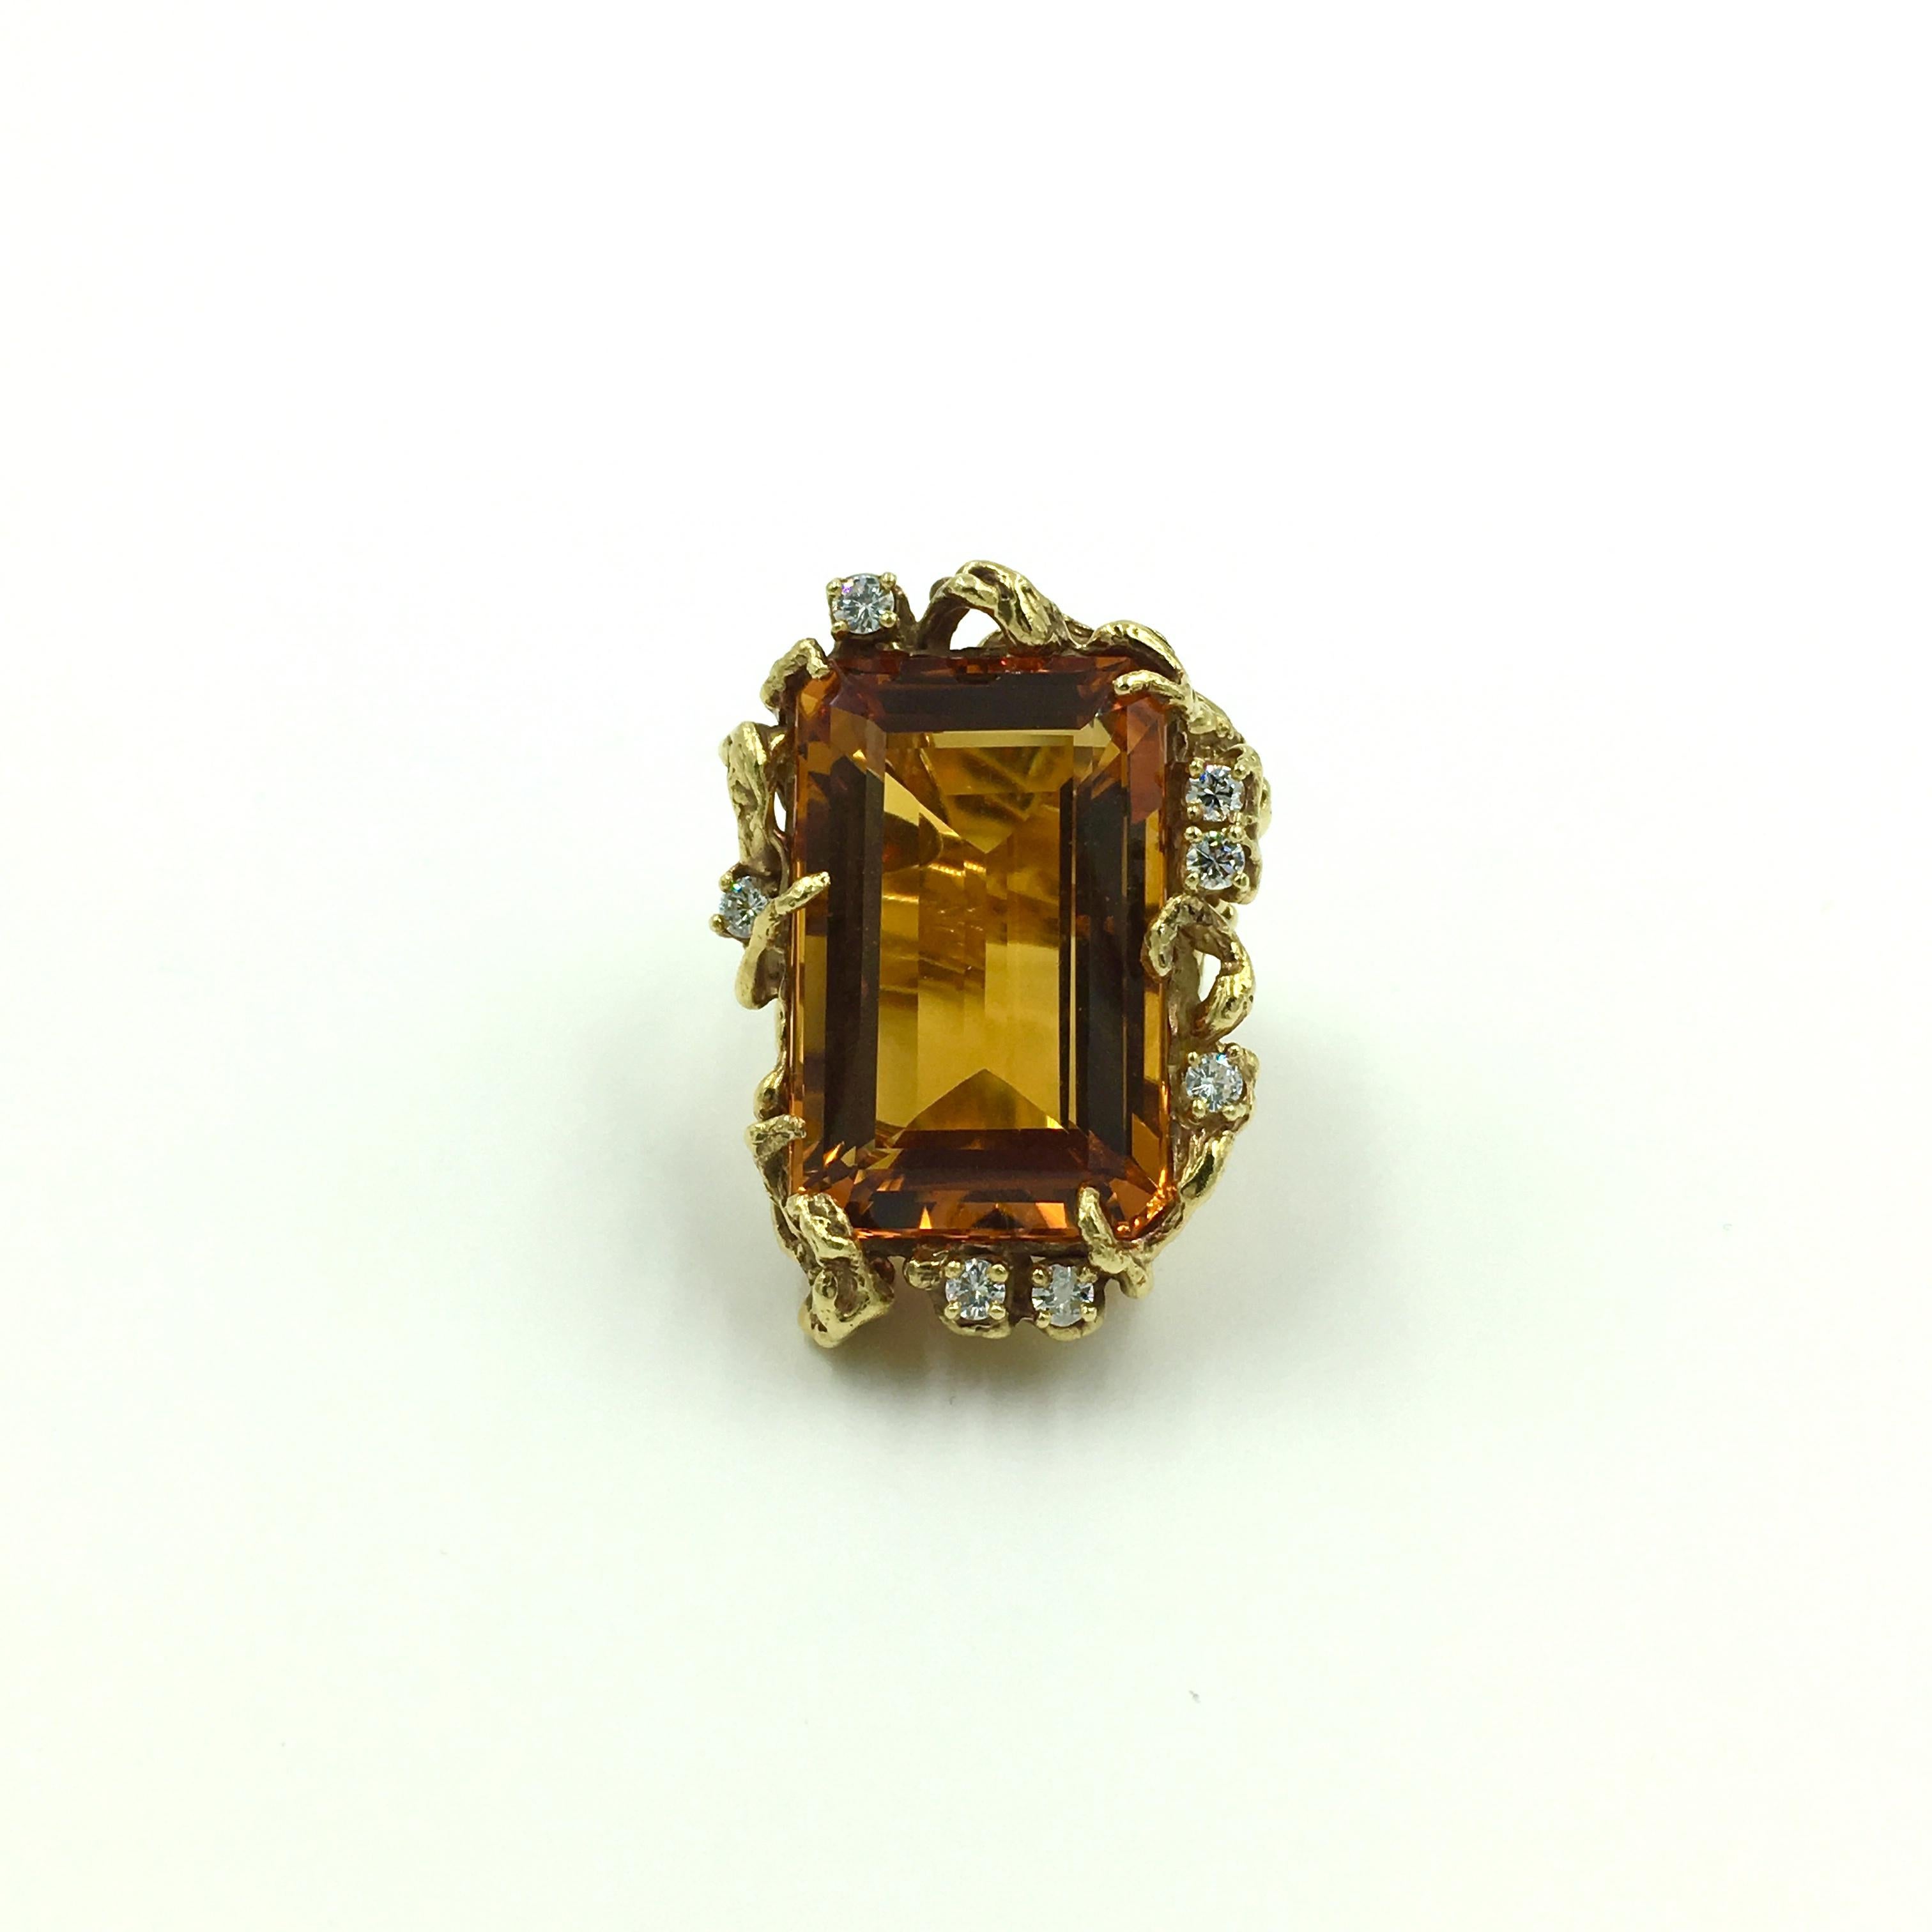 An 18 karat yellow gold, citrine and diamond ring. Arthur King, Circa 1970. Set asymmetrically with an emerald cut golden orange citrine, measuring approximately 25.00 x 17.00 x 10.50mm, and weighing approximately 29.65 carats, within a textured